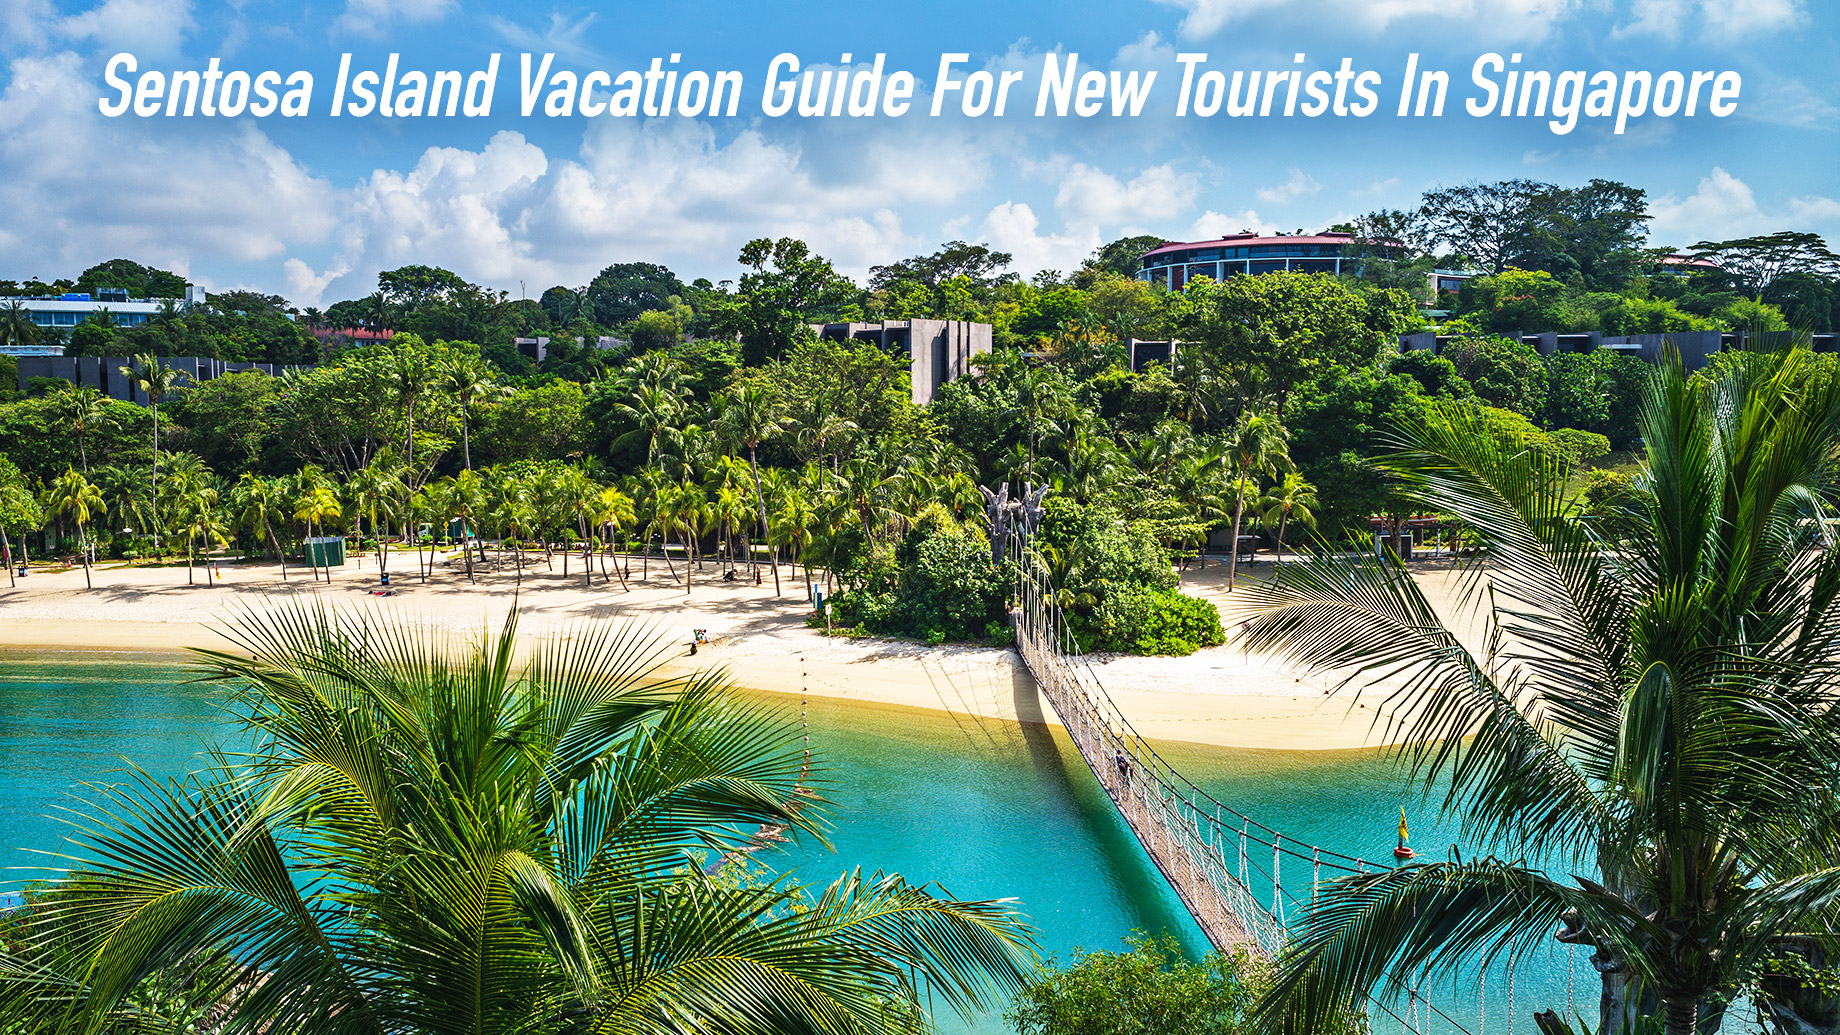 Sentosa Island Vacation Guide For New Tourists In Singapore